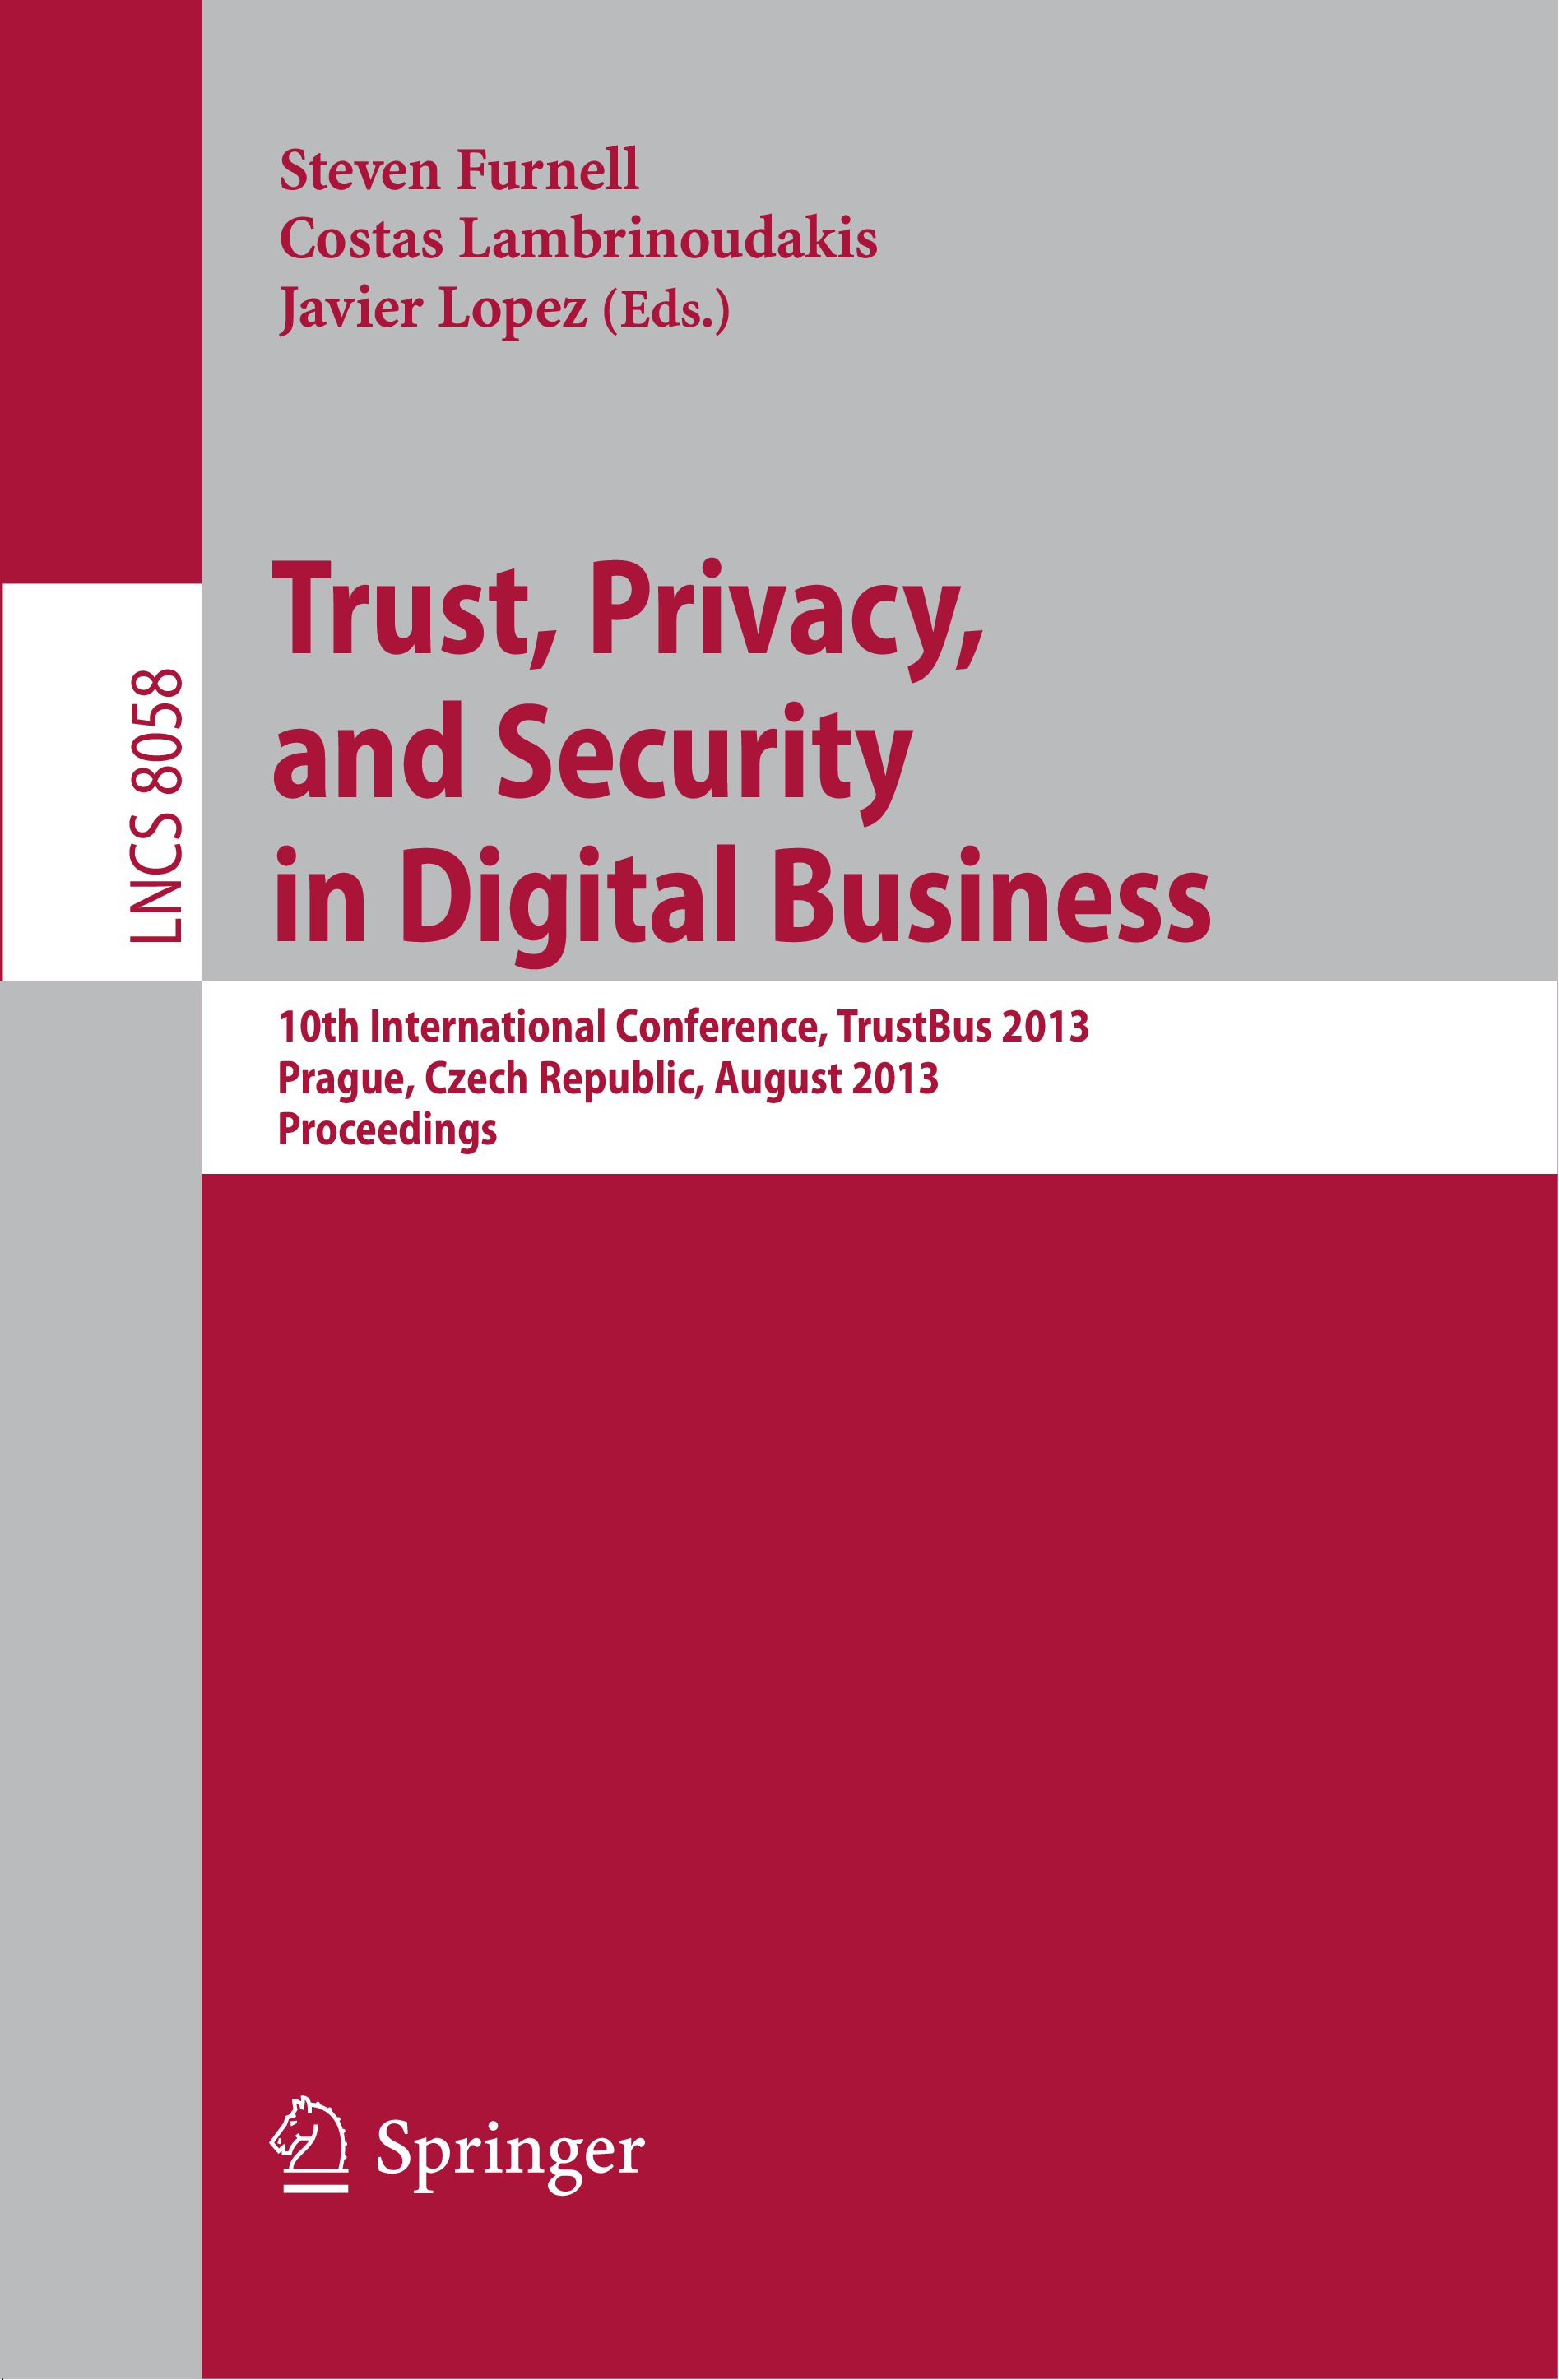 Proceedings of the 10th International Conference on Trust, Privacy, and Security in Digital Business (TRUSTBUS 2013)